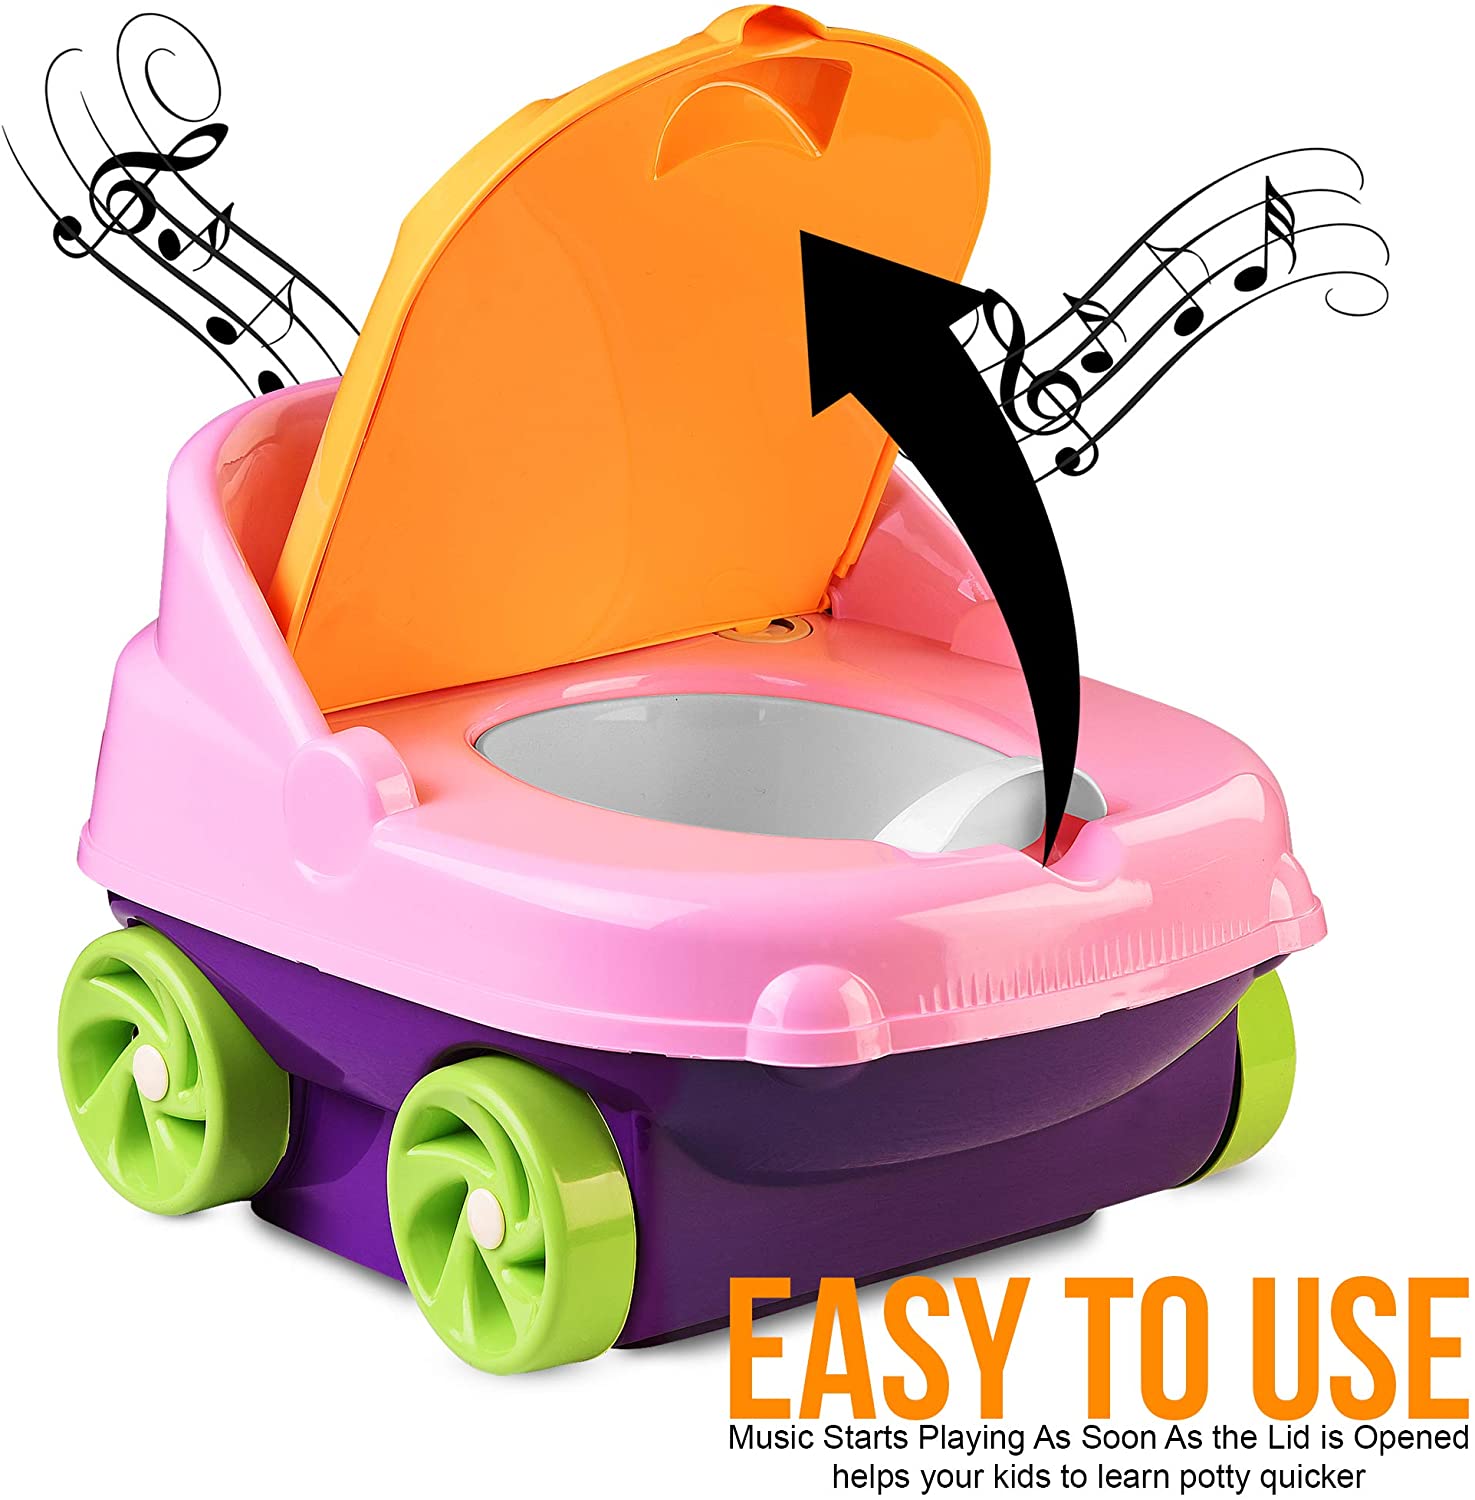 Potty Training with music